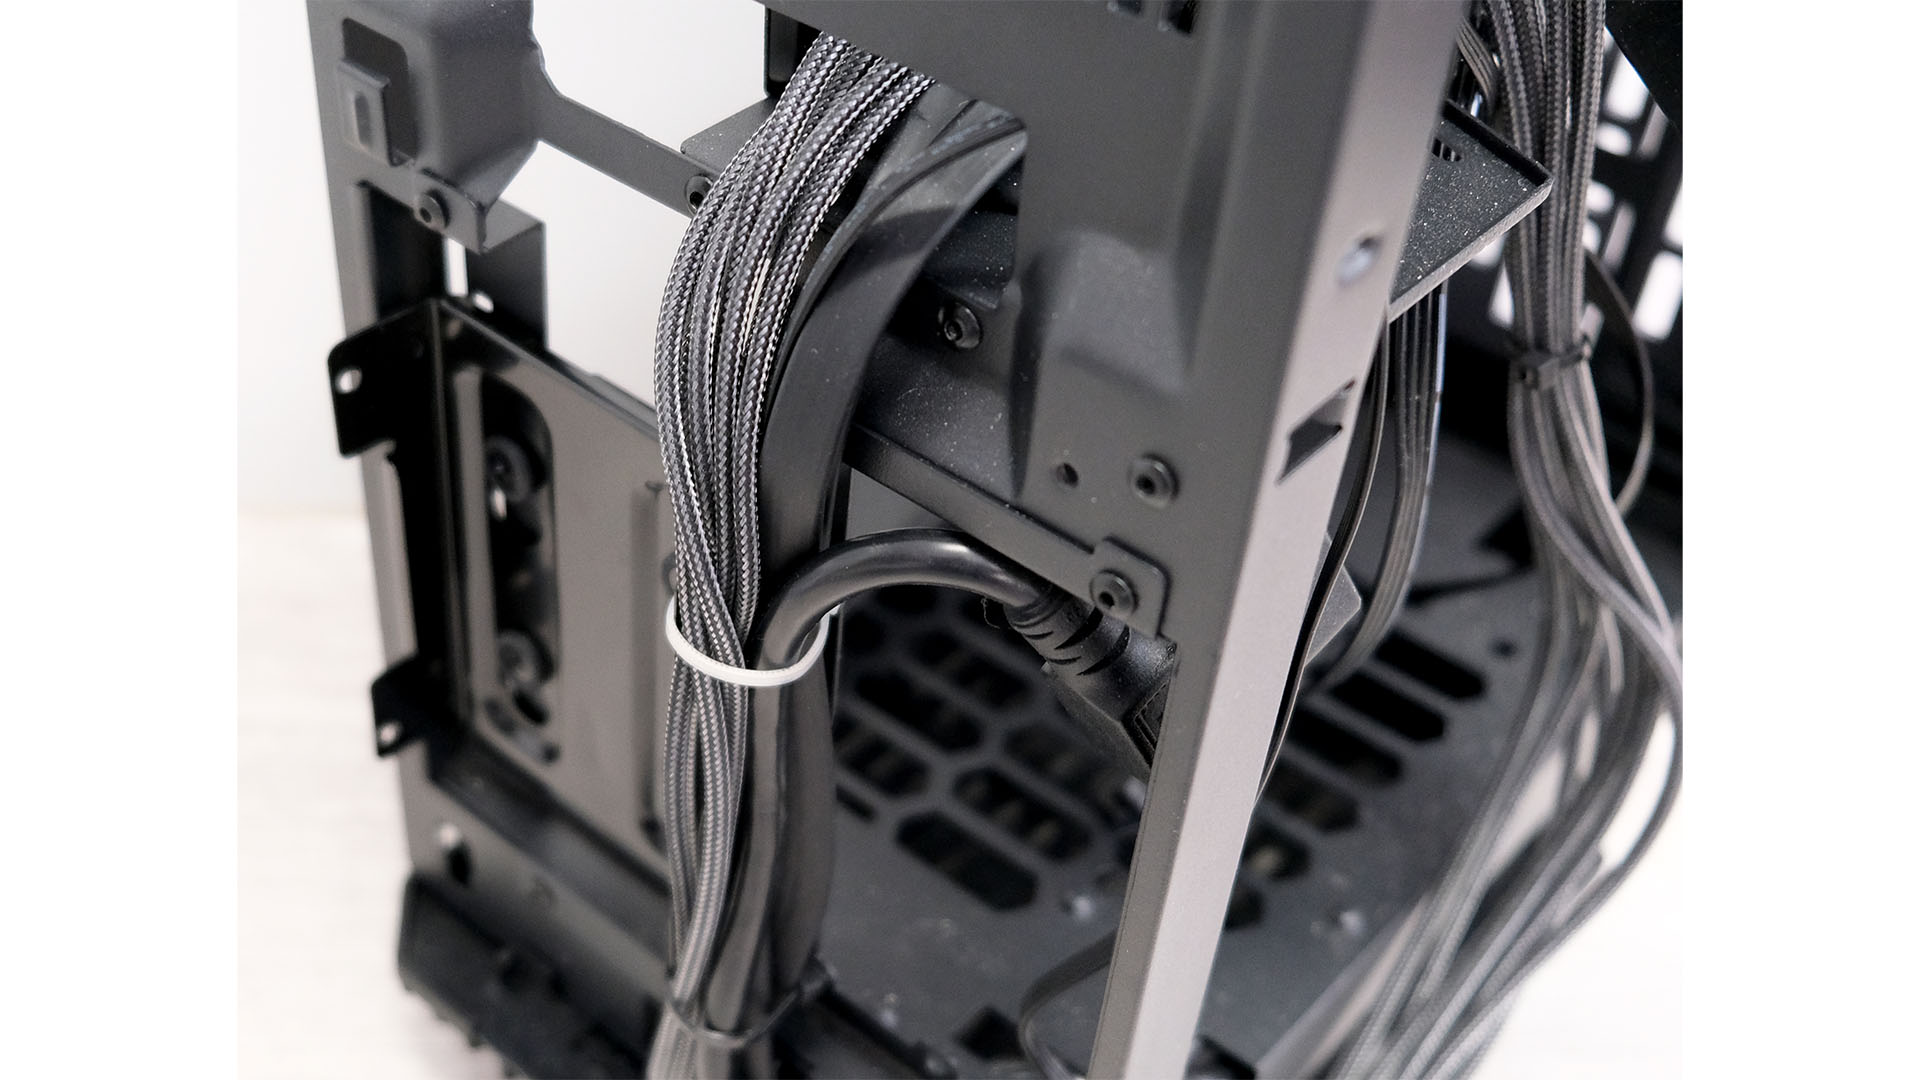 Cable management guide: Find alternative routes